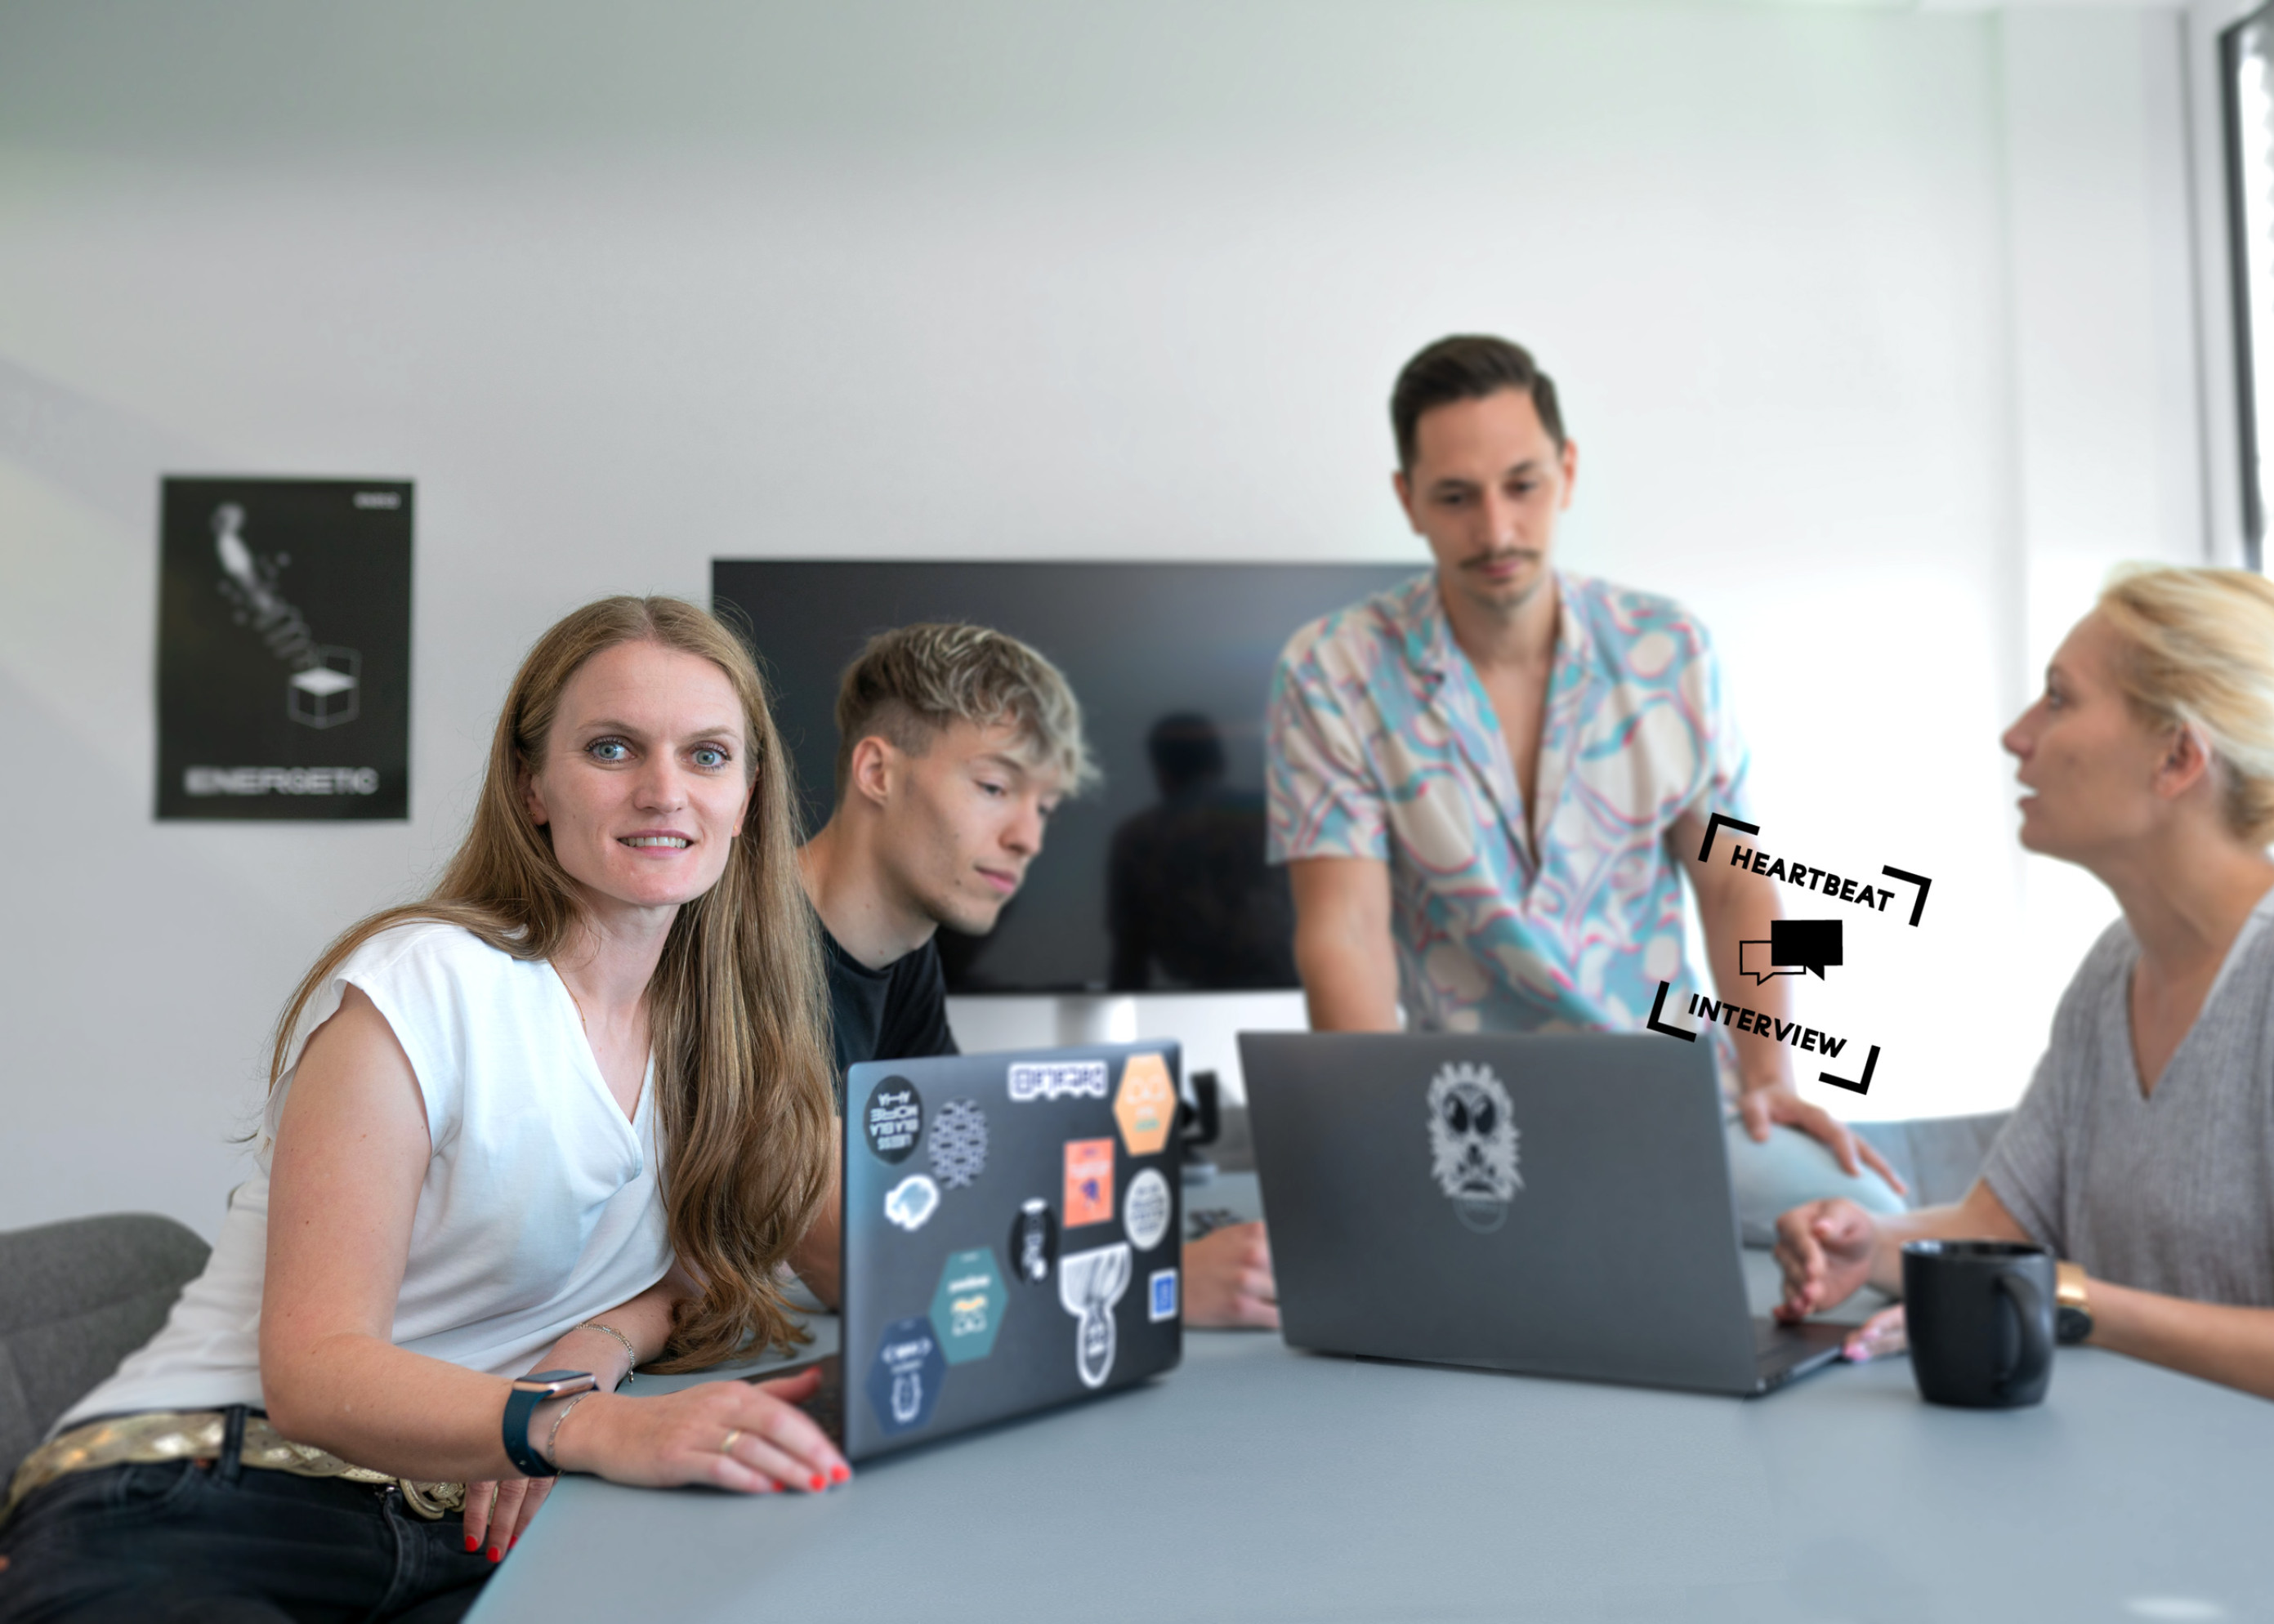 Gabriela Zitsch and team working with laptops at the desk